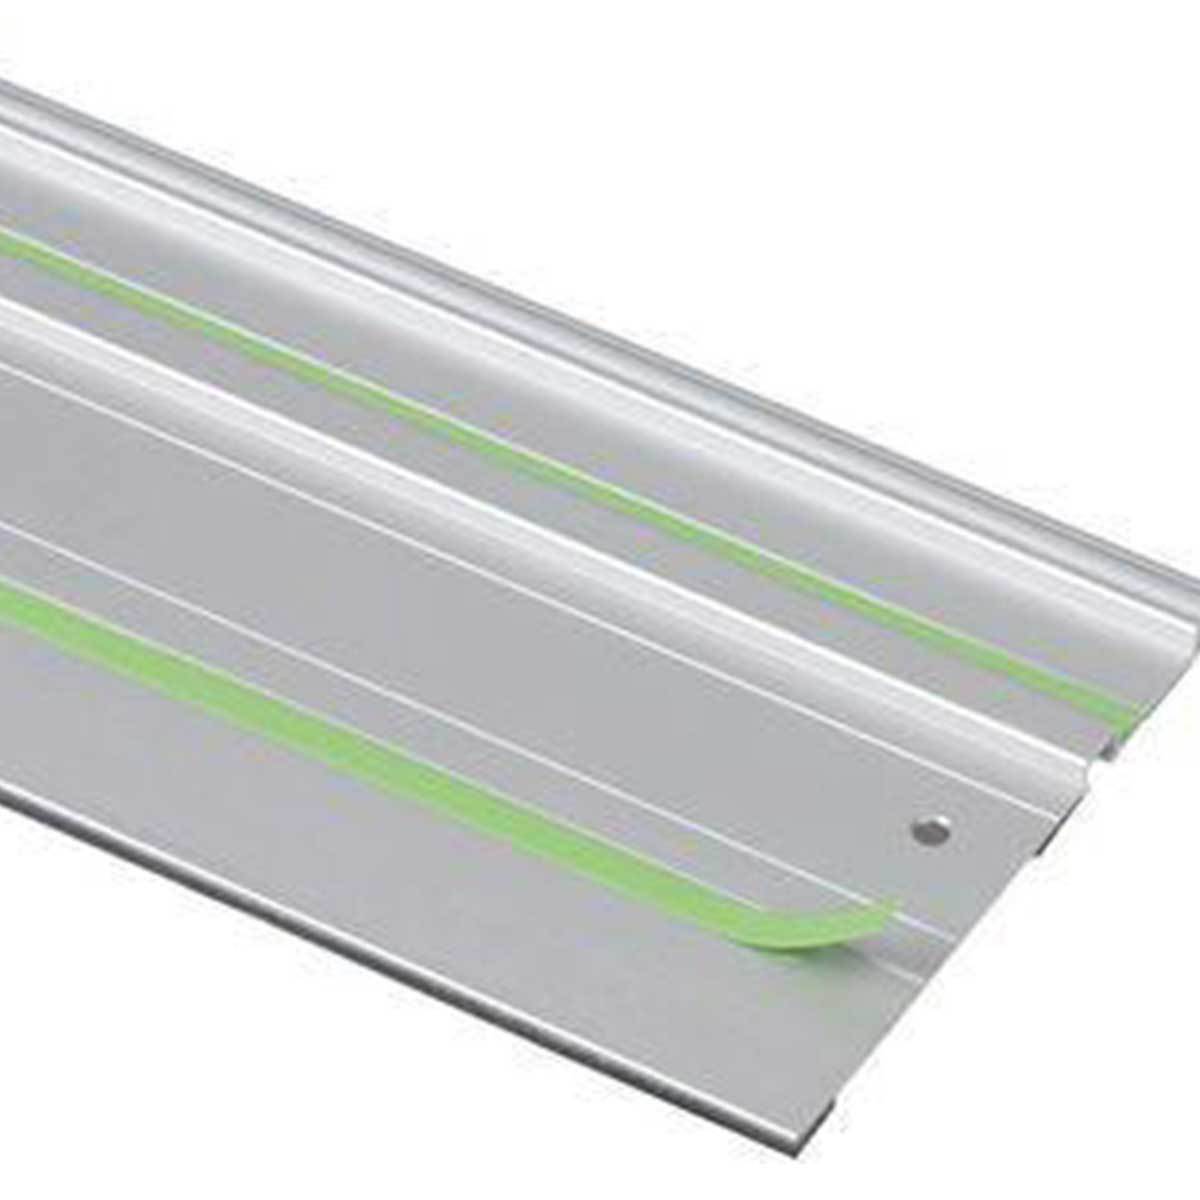 These slippery green PTE glide strips allow a track saw to glide easily across the guide rail and over dust and debris.